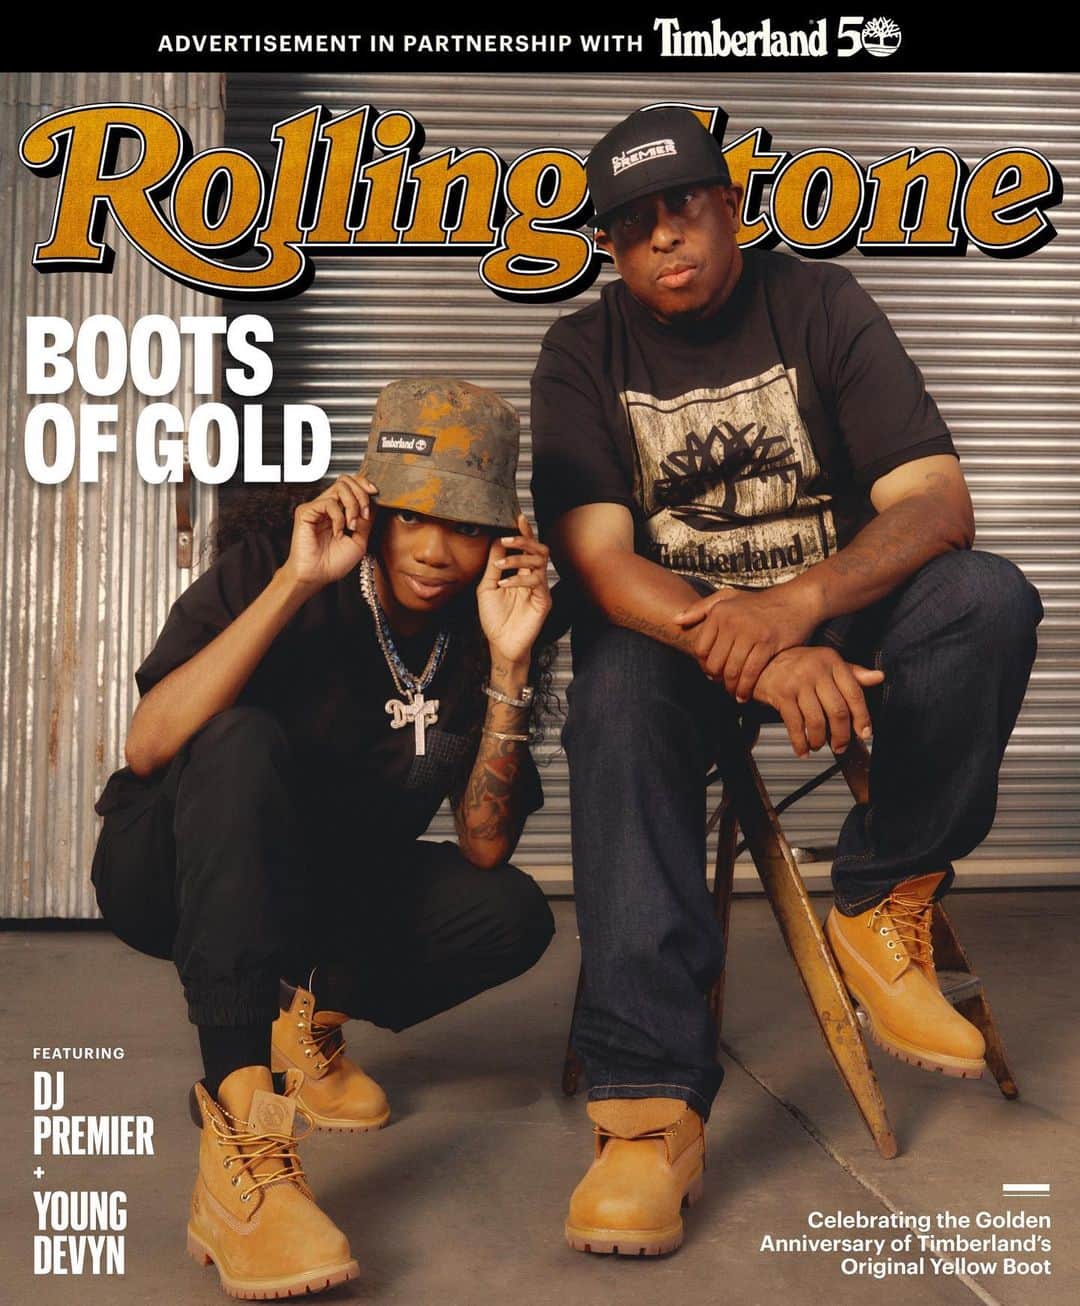 DJプレミアのインスタグラム：「I rocked with @timberland and @rollingstone to celebrate all things hip-hop & the iconic Original Timberland Boot. Check out my feature in “The Icon” digital look book [link to look book coming soon]" Salute @youngdevyn reppin' with me for the cover.」